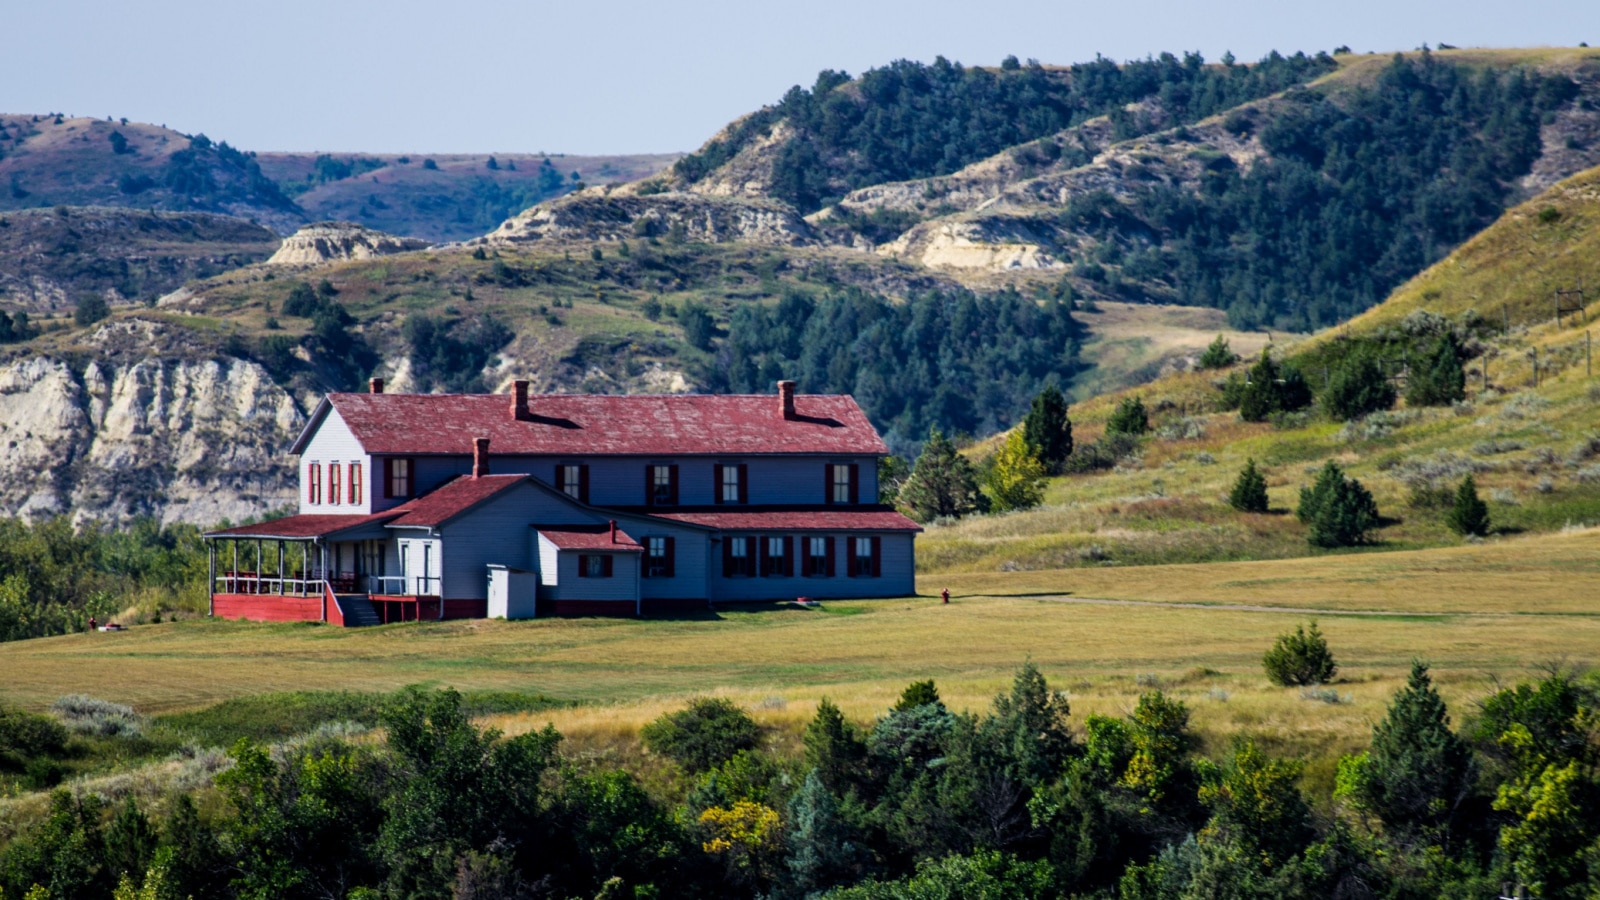 Historic home built by the Marquis de Mores in 1883 as a hunting lodge and summer home for his family and guests. In Medora, North Dakota.